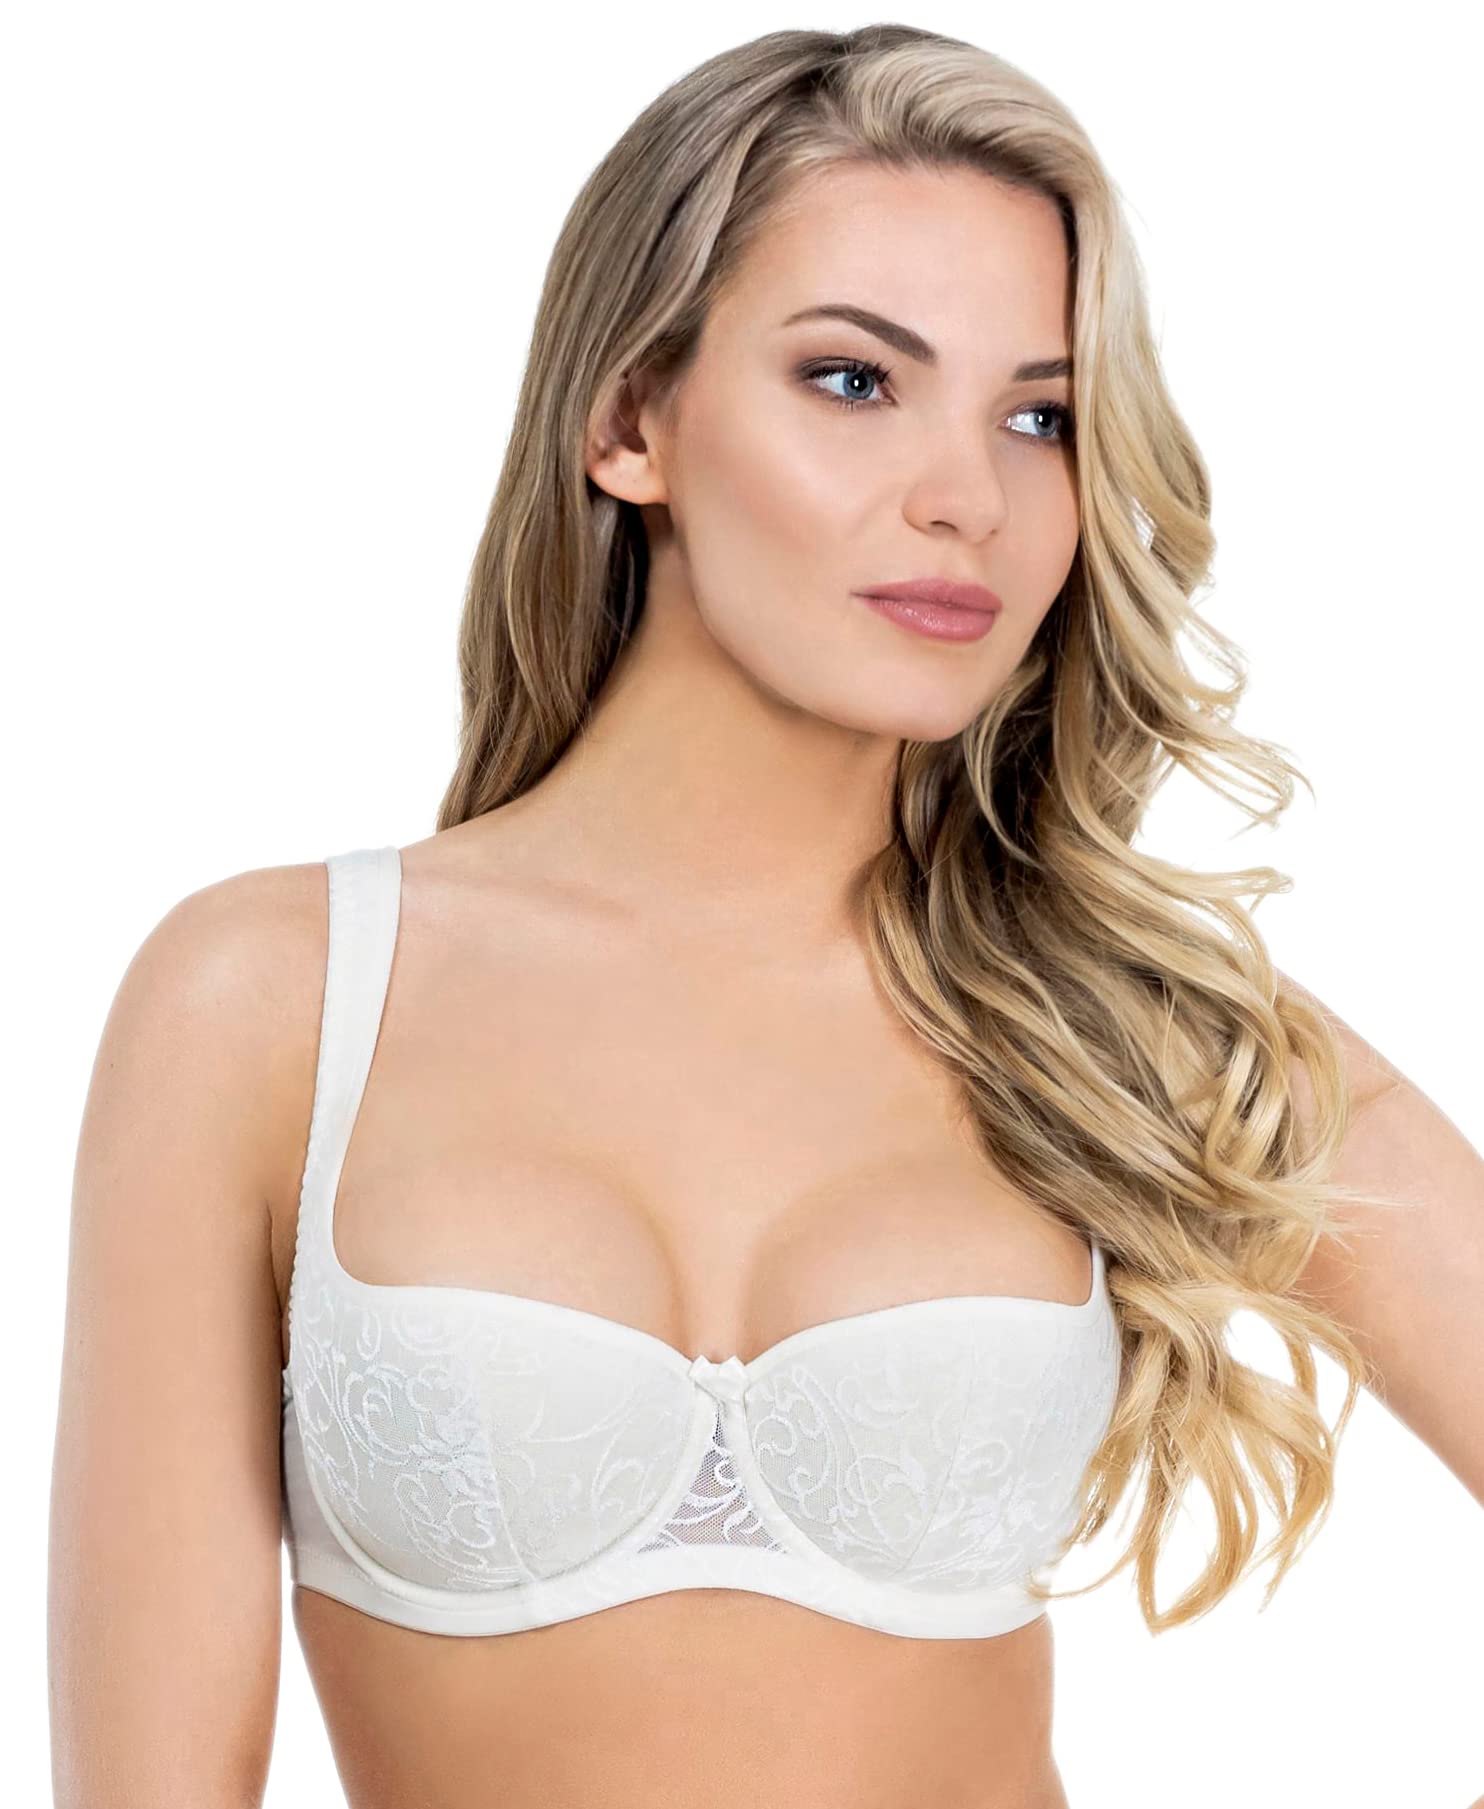 Rosme Womens Balconette Bra With Padded Straps, Collection Grand, Ivory, Size 38B